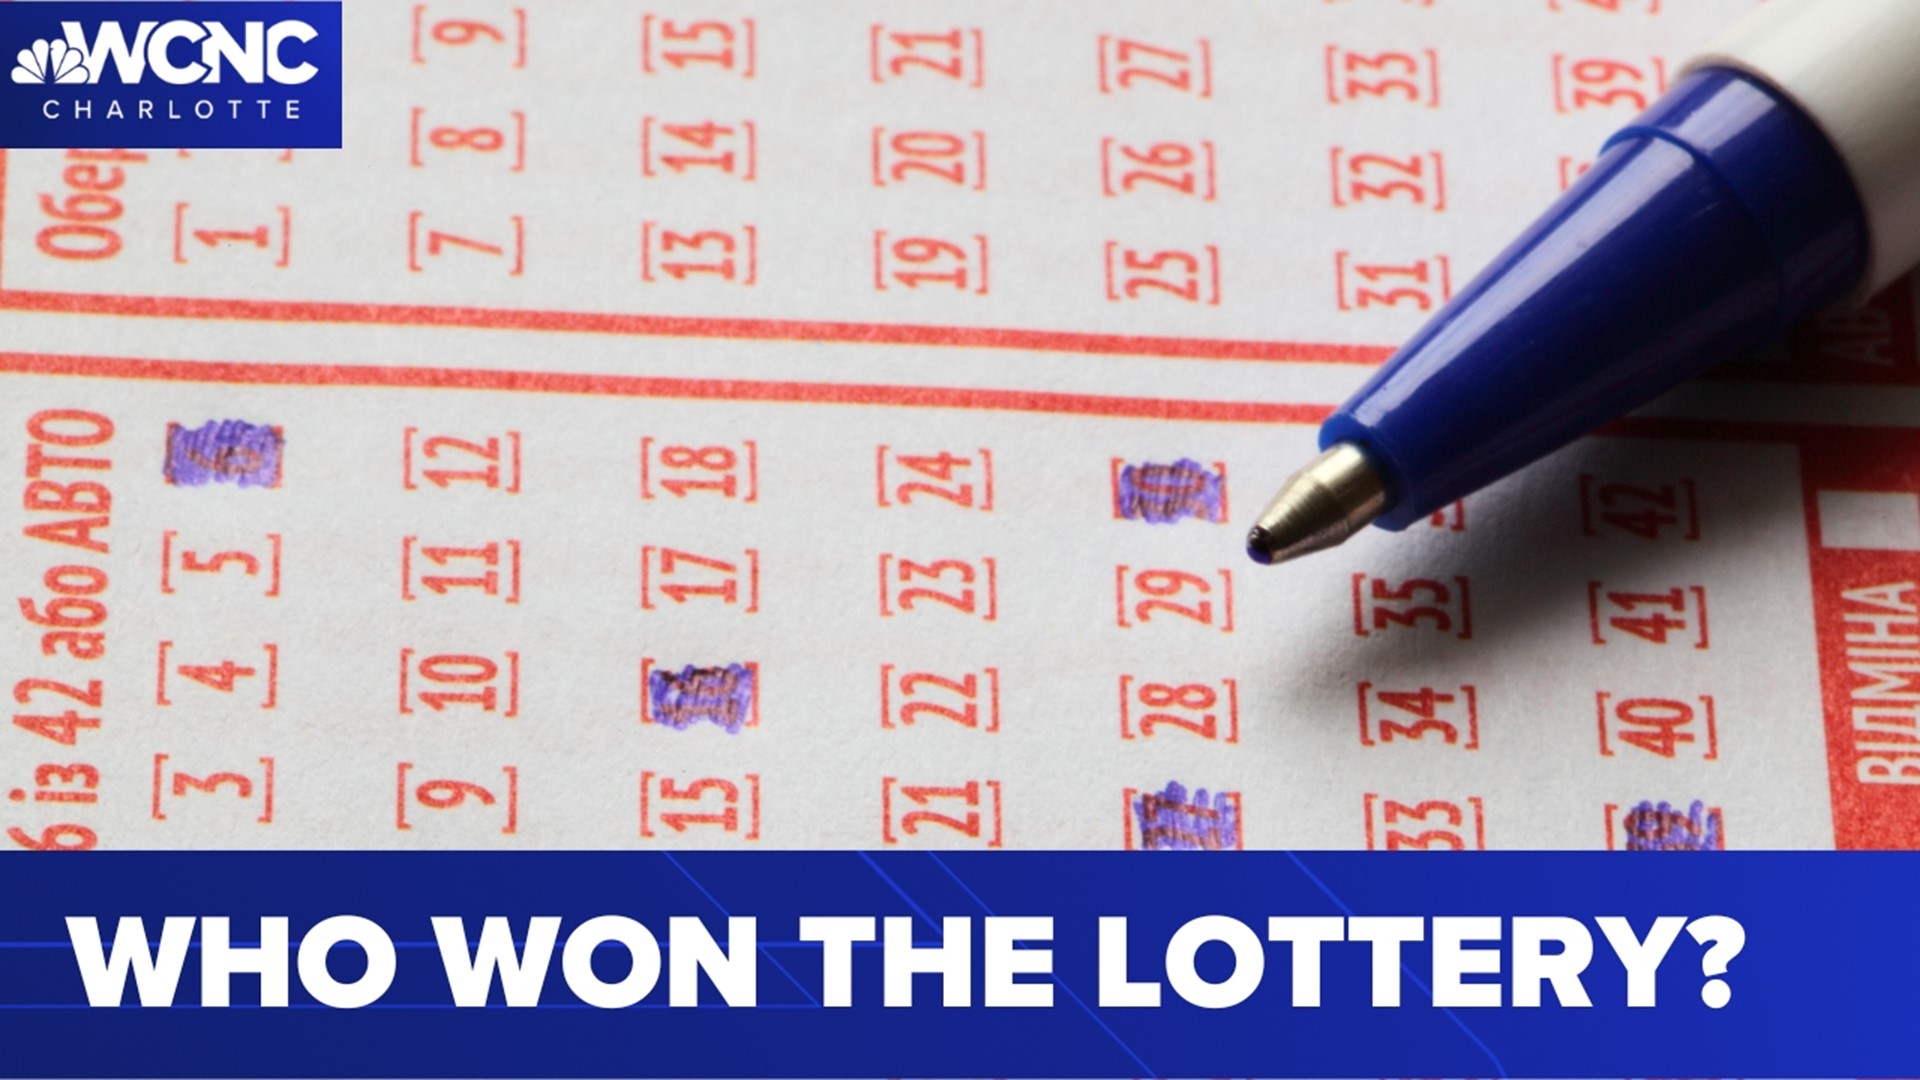 The $1 million wins in North Carolina were two of 26 nationally in the drawing.